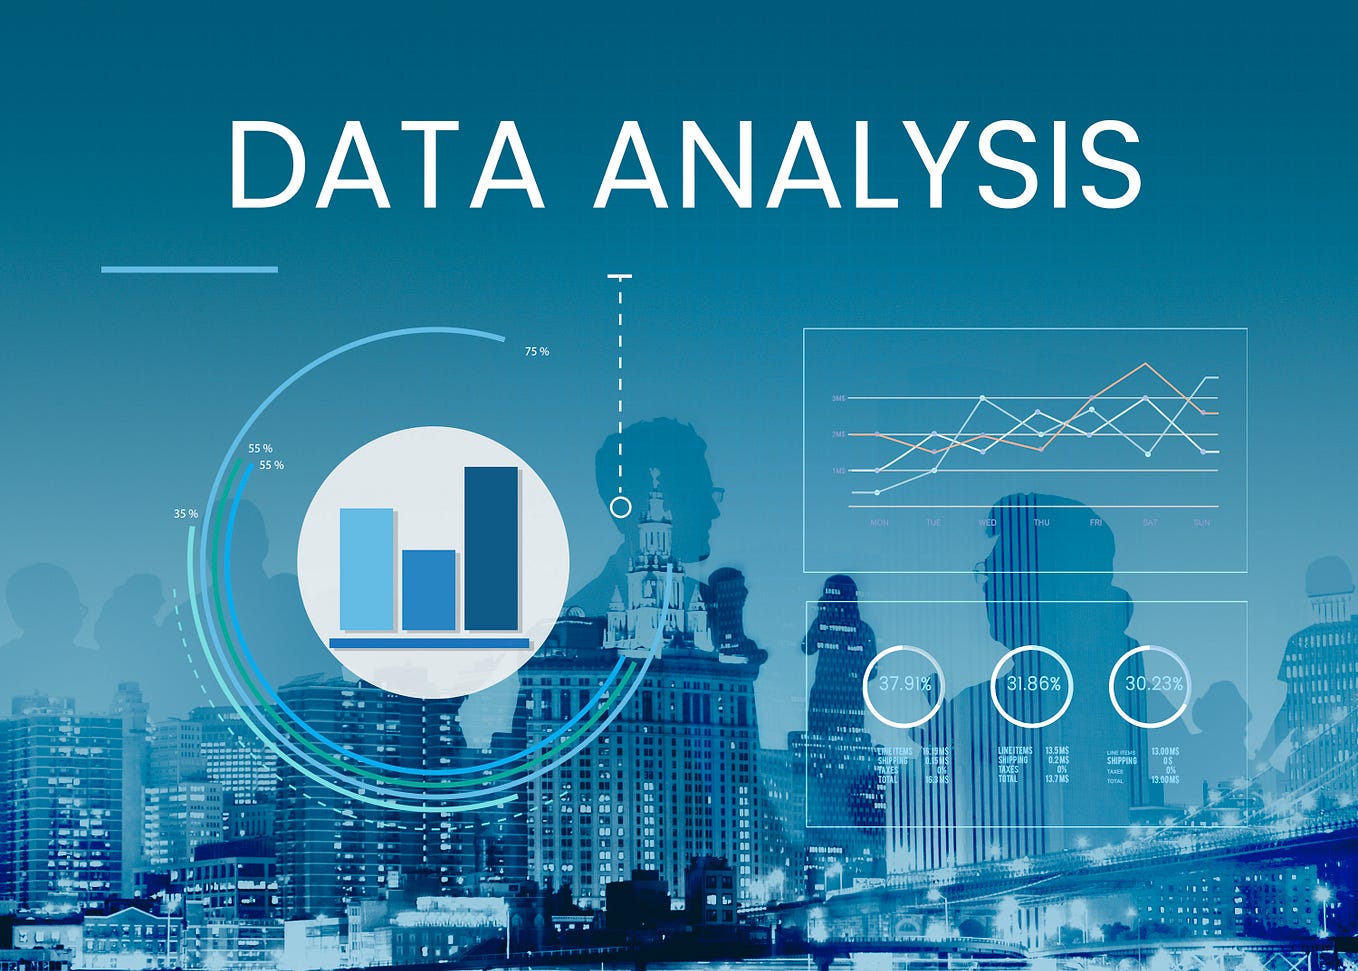 Data Analysis Methods What Are They And How To Use Them Know By